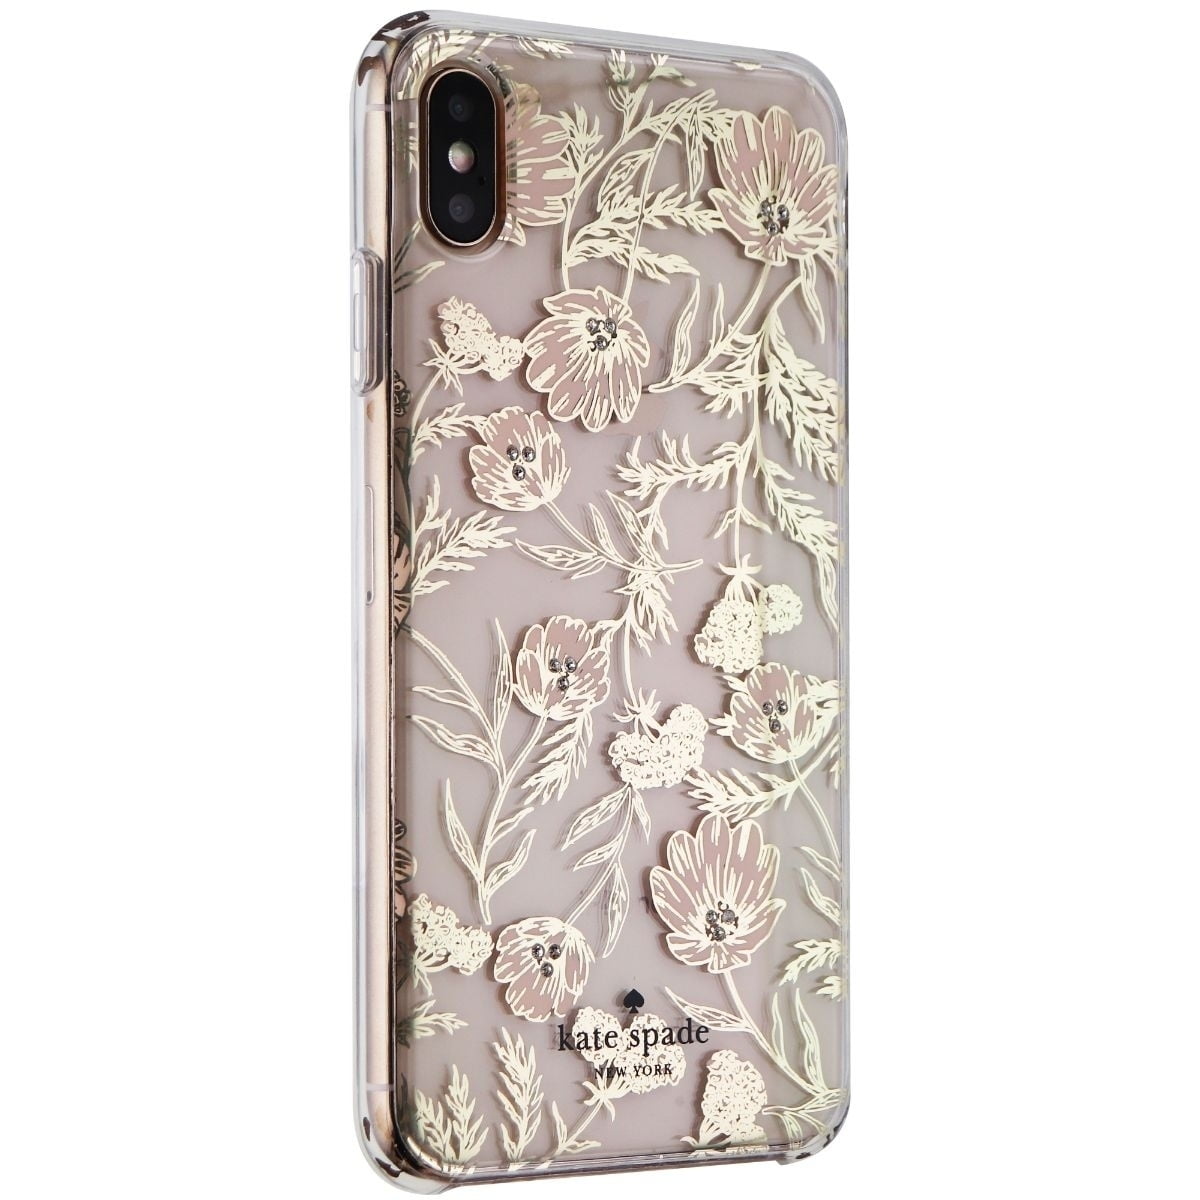 Kate Spade Hardshell Case for Apple iPhone XS Max - Blossom Pink/Gold  Foil/Gems (Used) 